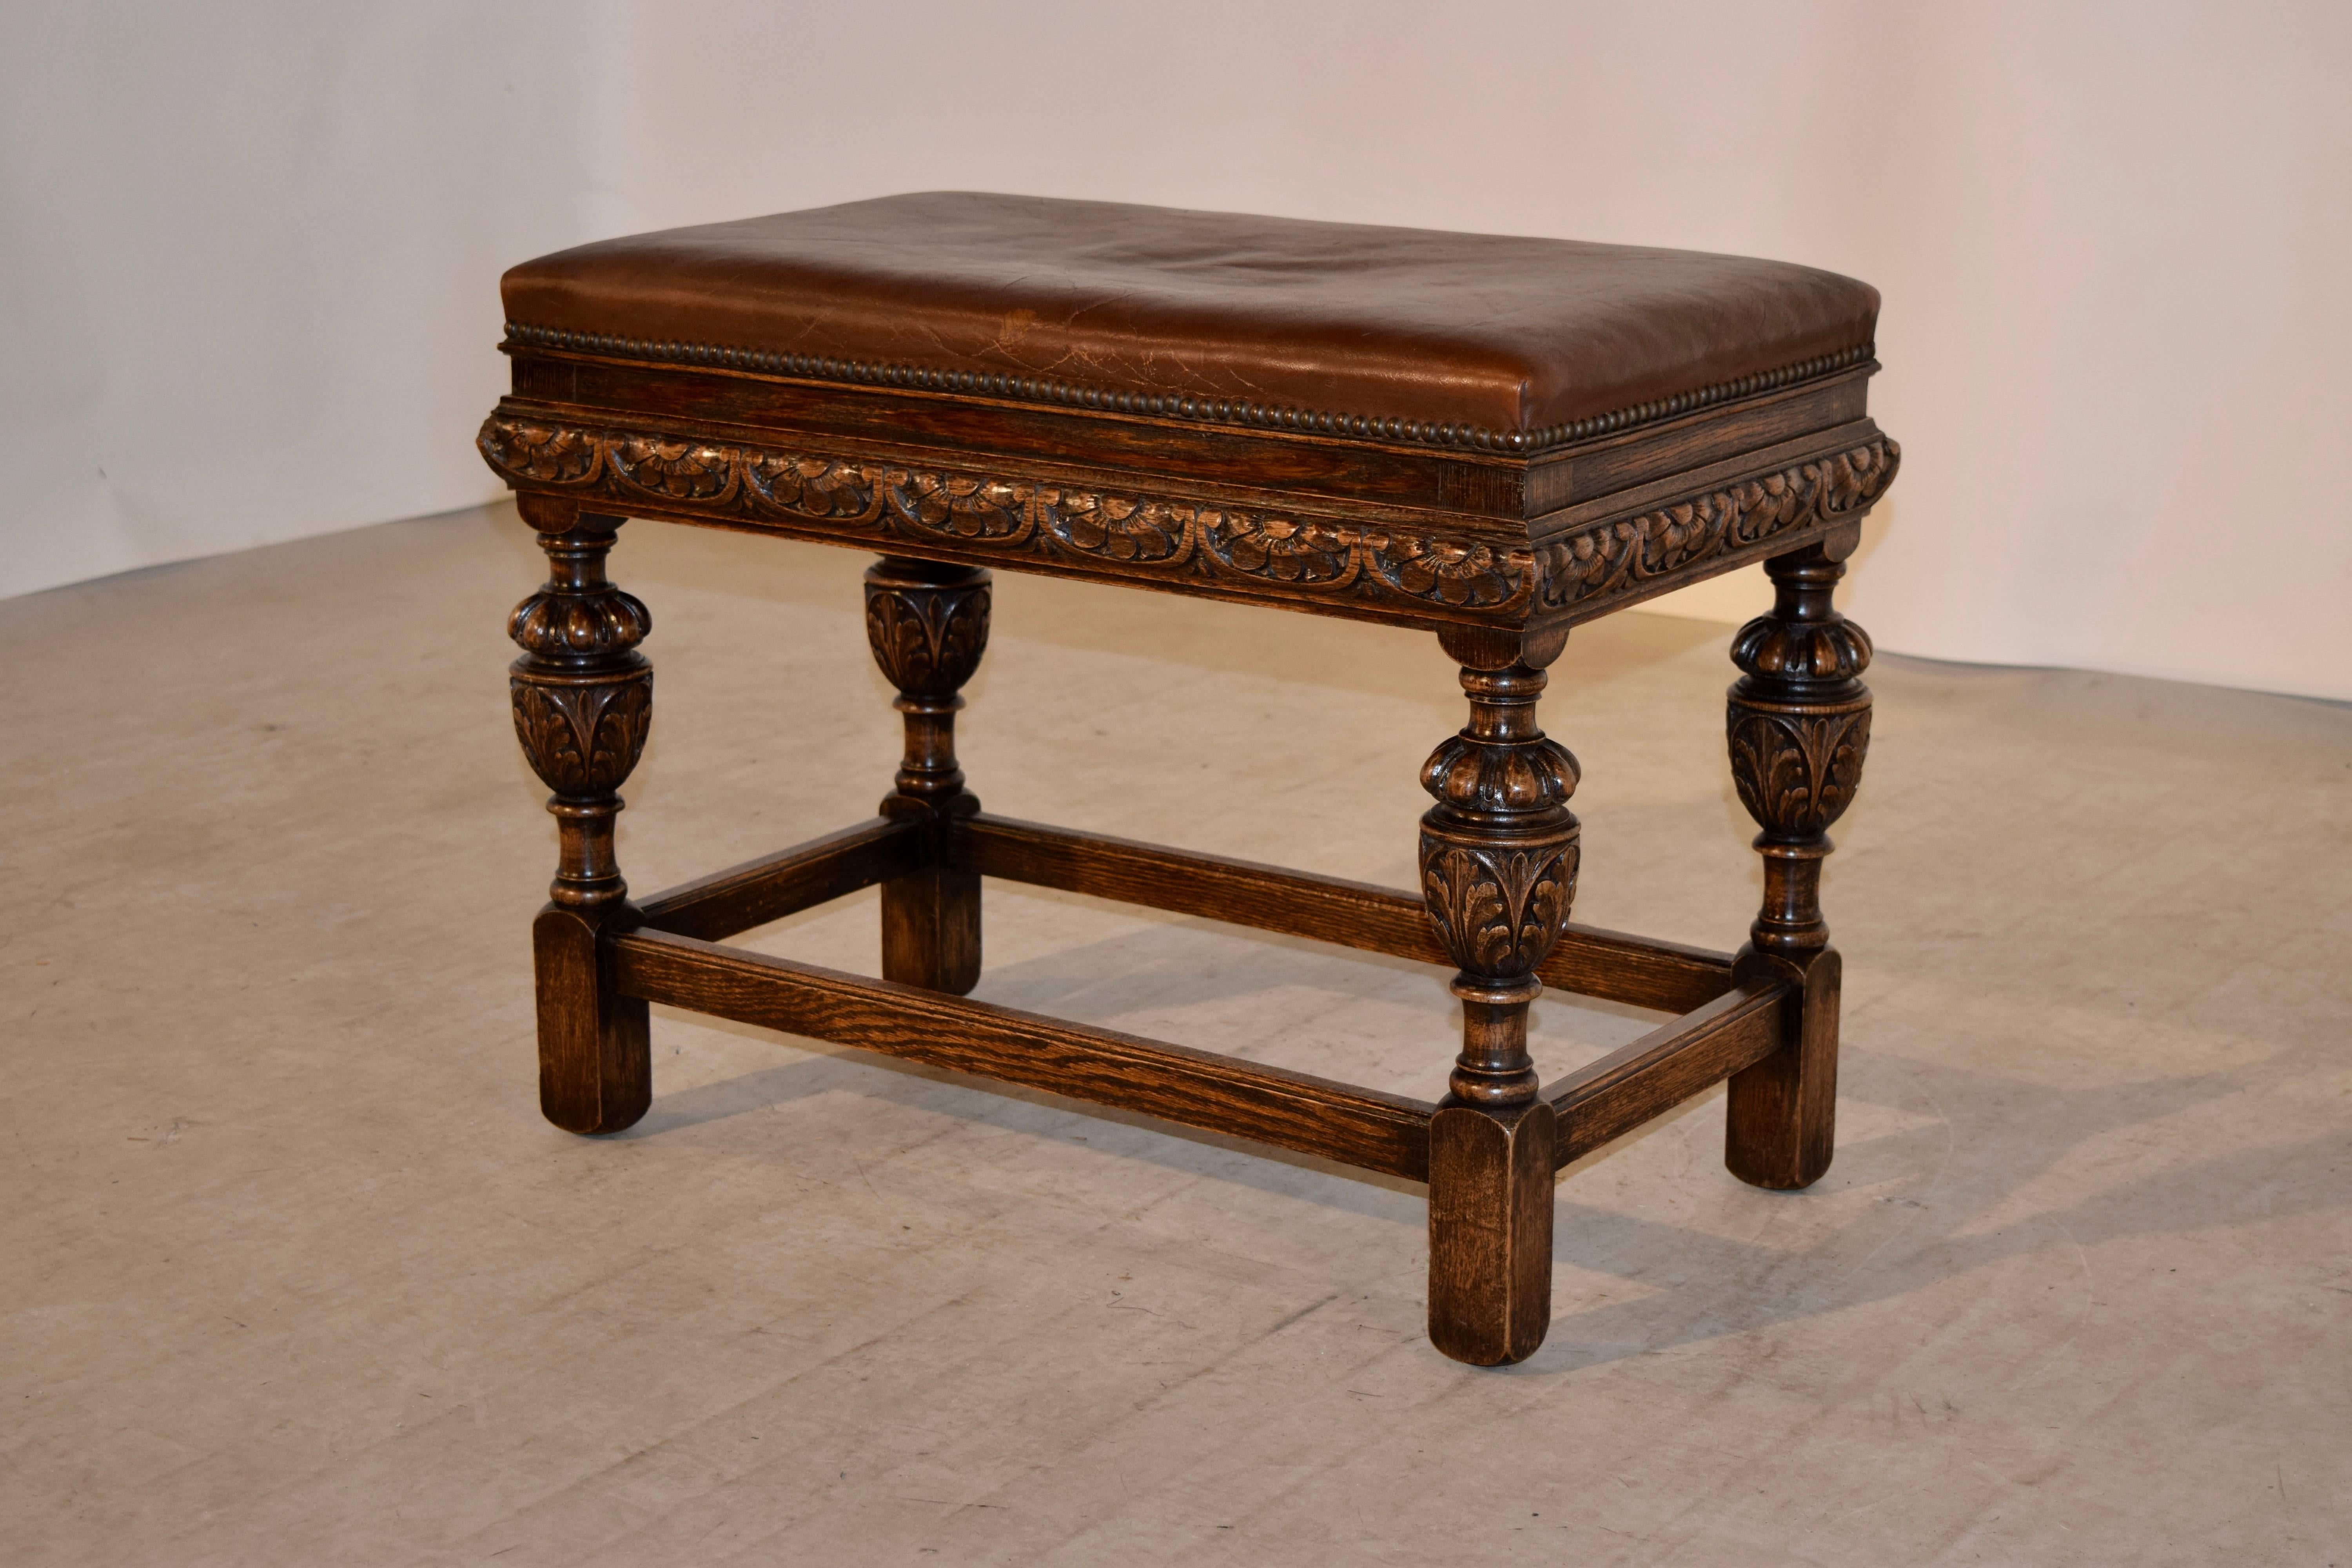 19th century oak bench from England with an upholstered leather top, decorated with brass nails, following down to a hand-turned and carved decorated frame and legs, joined by simple stretchers.